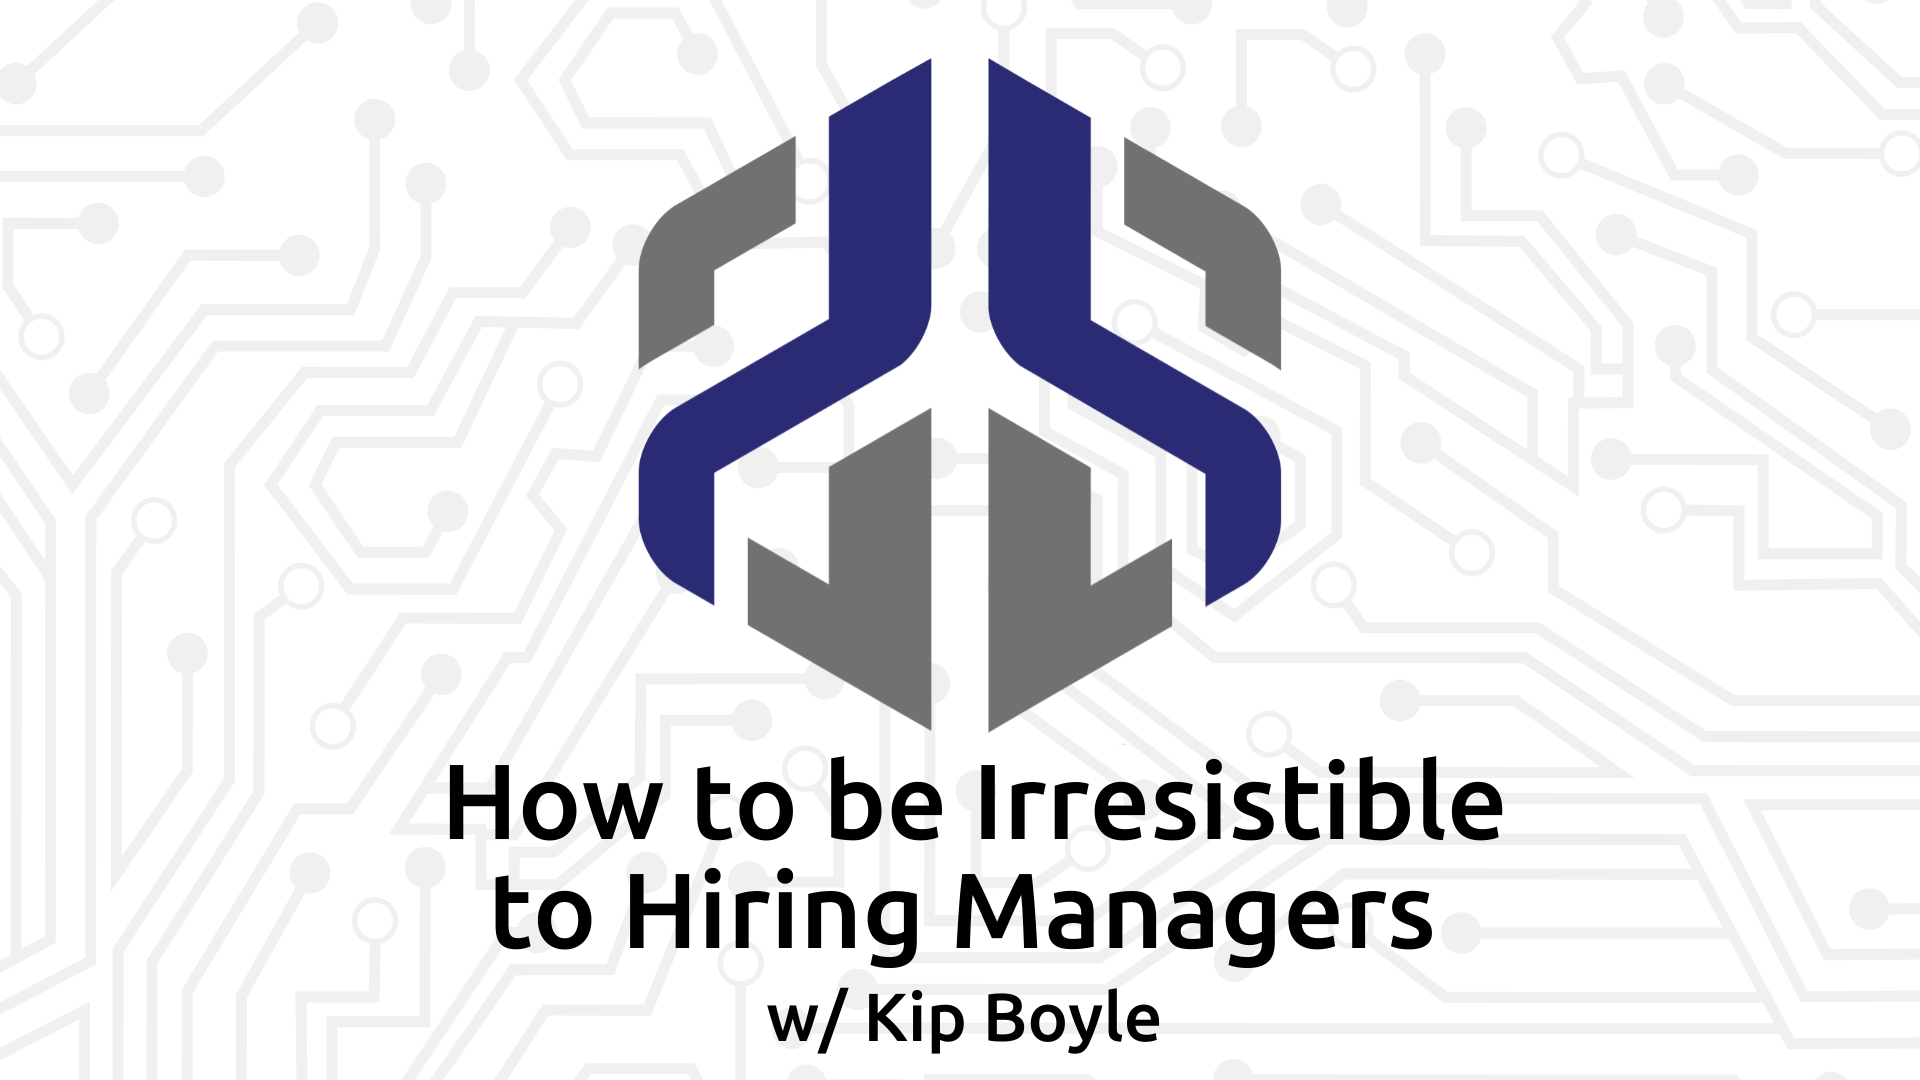 How to be Irresistible to Hiring Managers with Kip Boyle